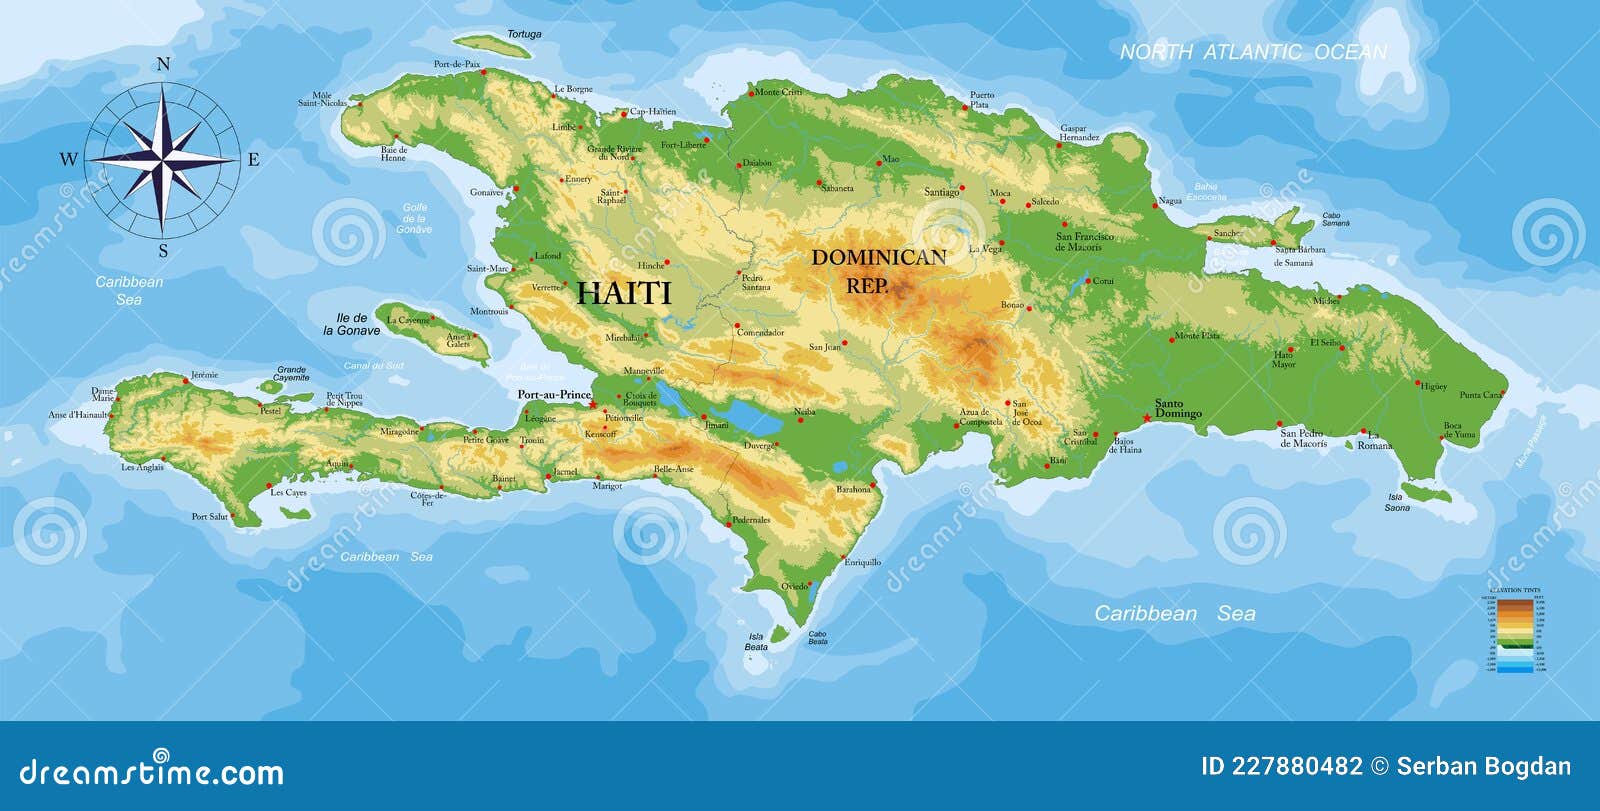 haiti and dominican republic physical map